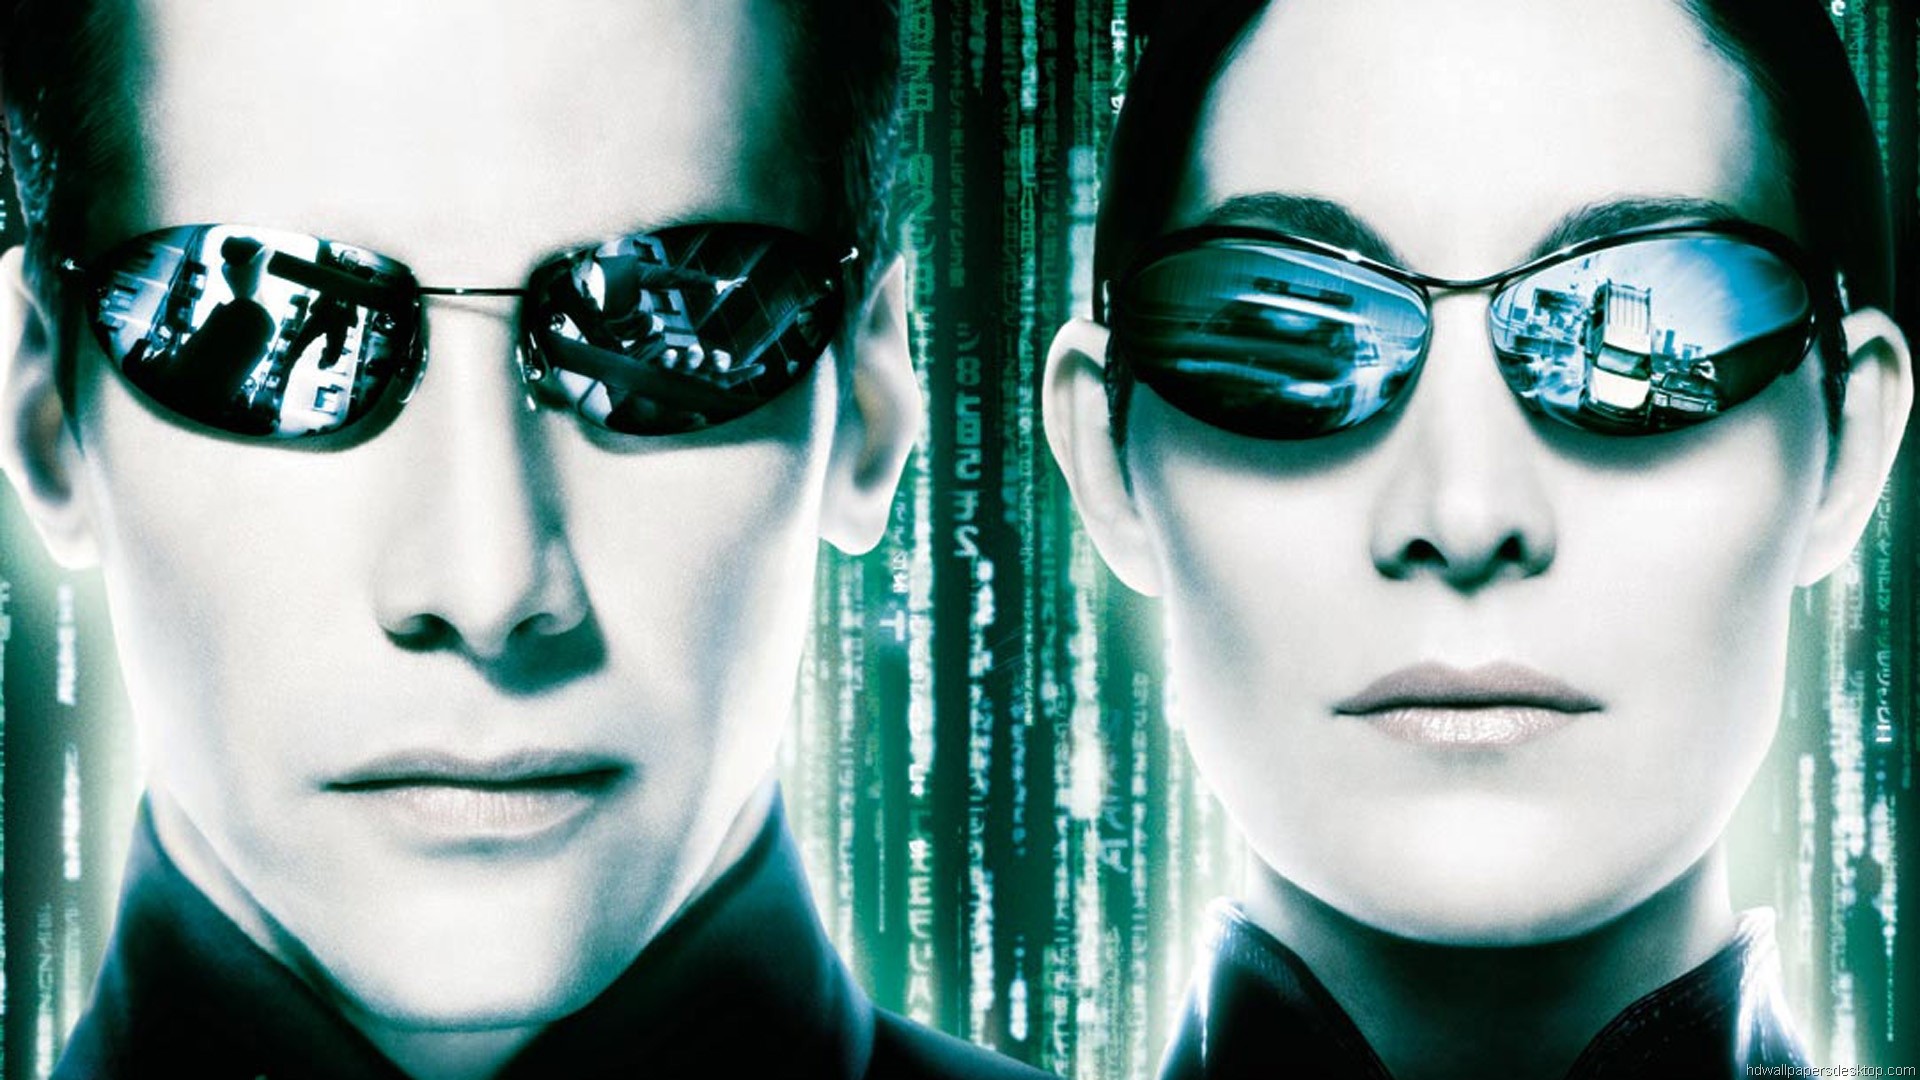 The Matrix Movies The Matrix Reloaded Neo Keanu Reeves Carrie Anne Moss Trinity Movies 1920x1080